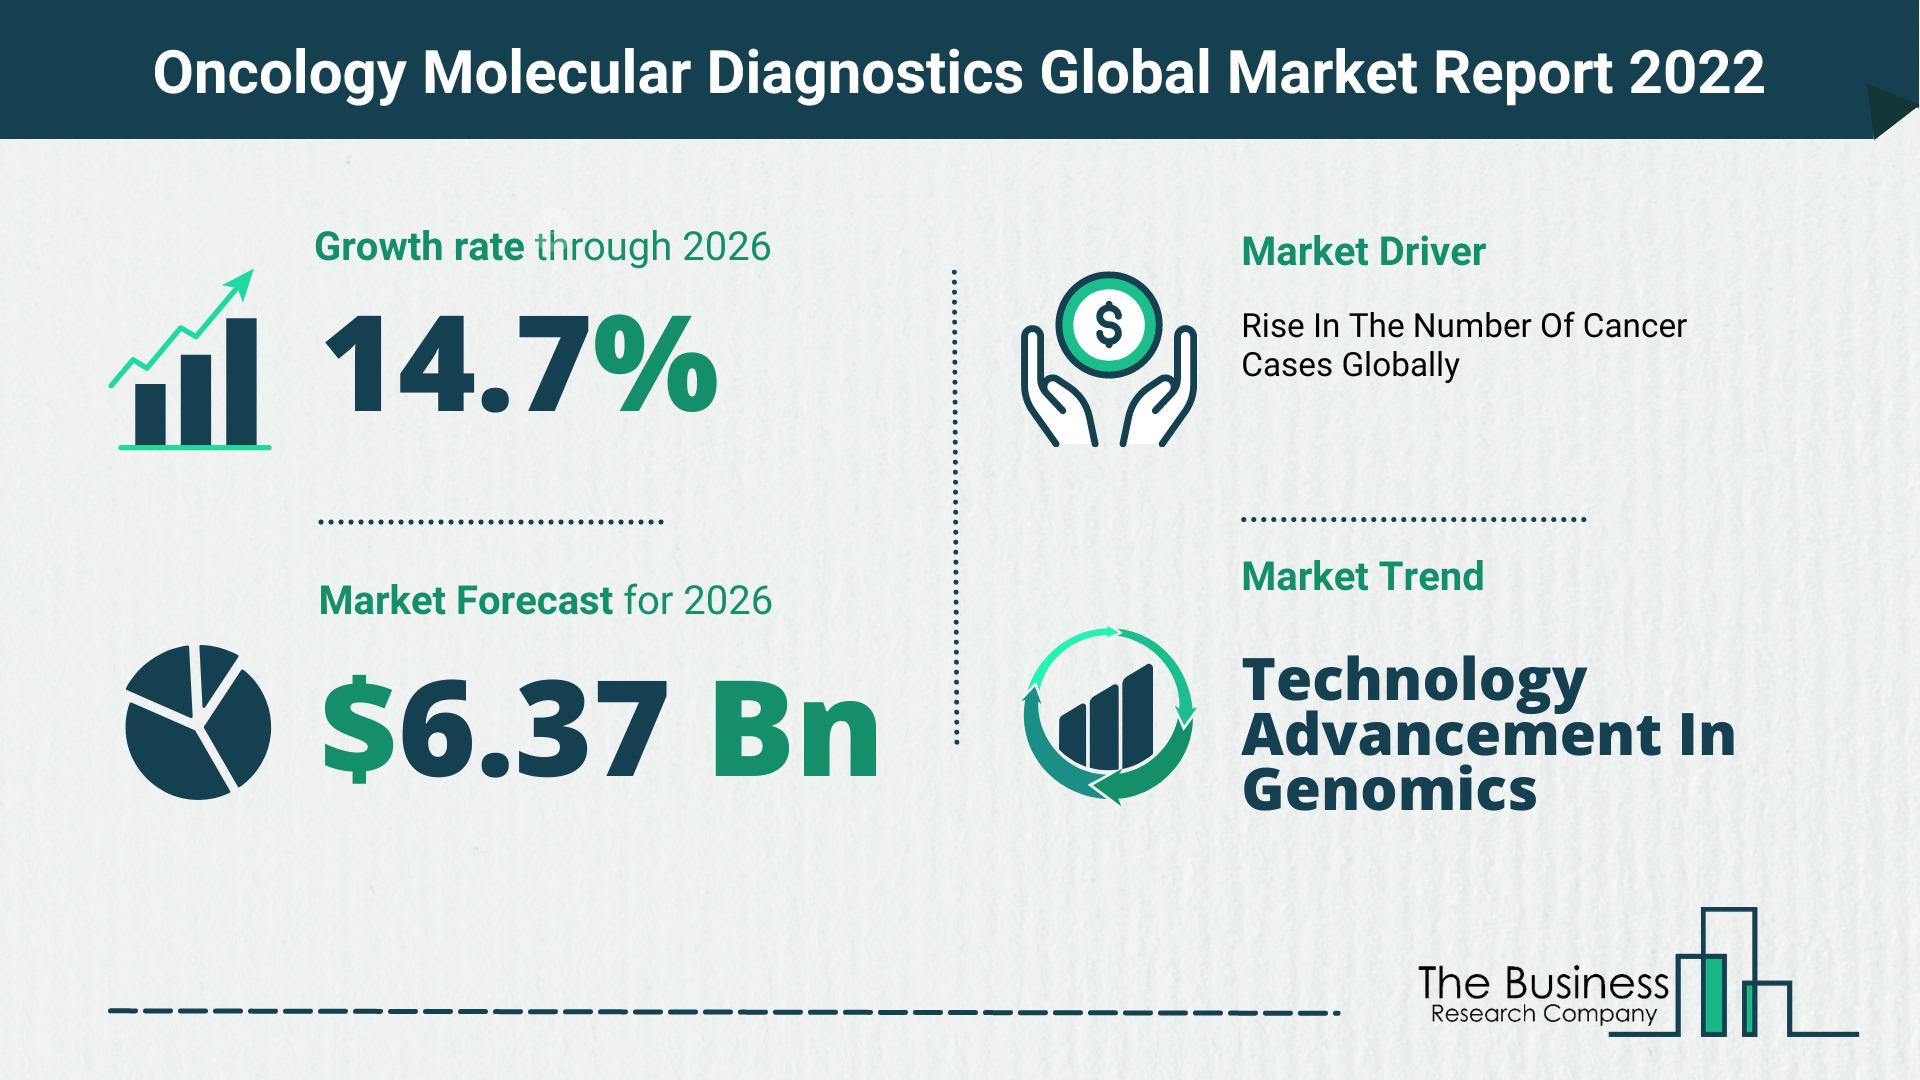 Global Oncology Molecular Diagnostics Market 2022 – Market Opportunities And Strategies